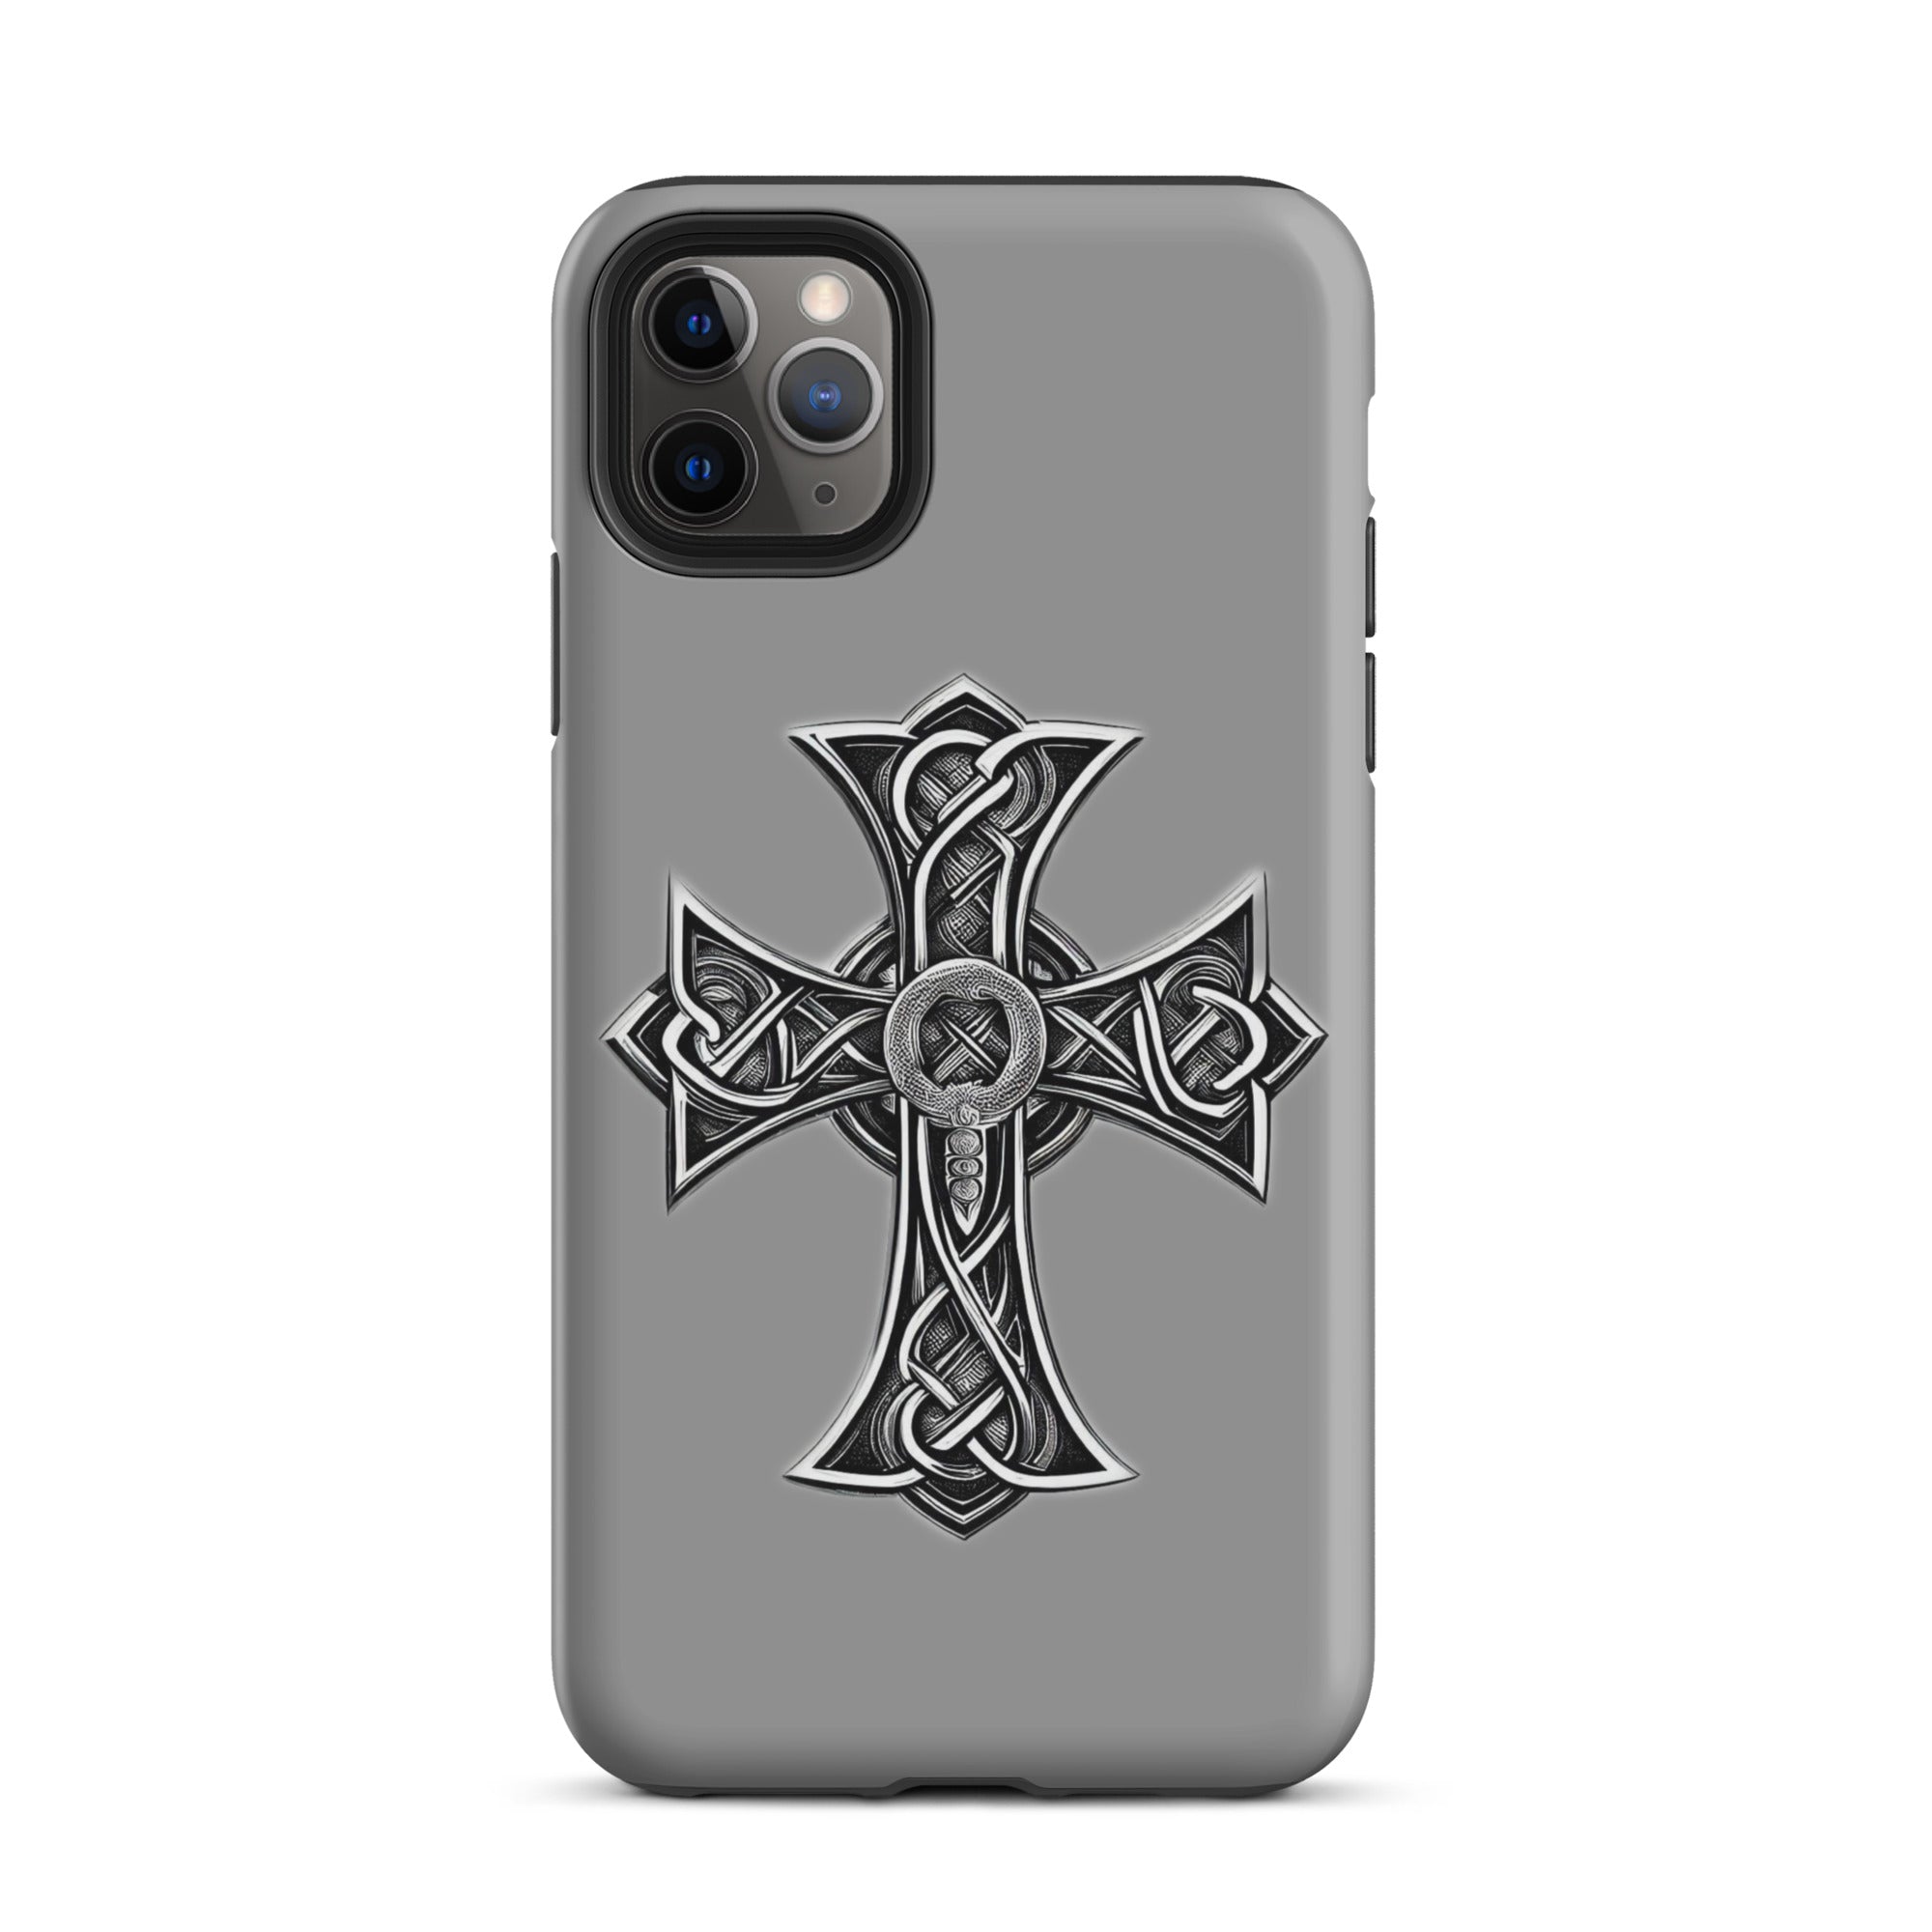 tough-case-for-iphone-matte-iphone-11-pro-max-front-6563847713e10.jpg